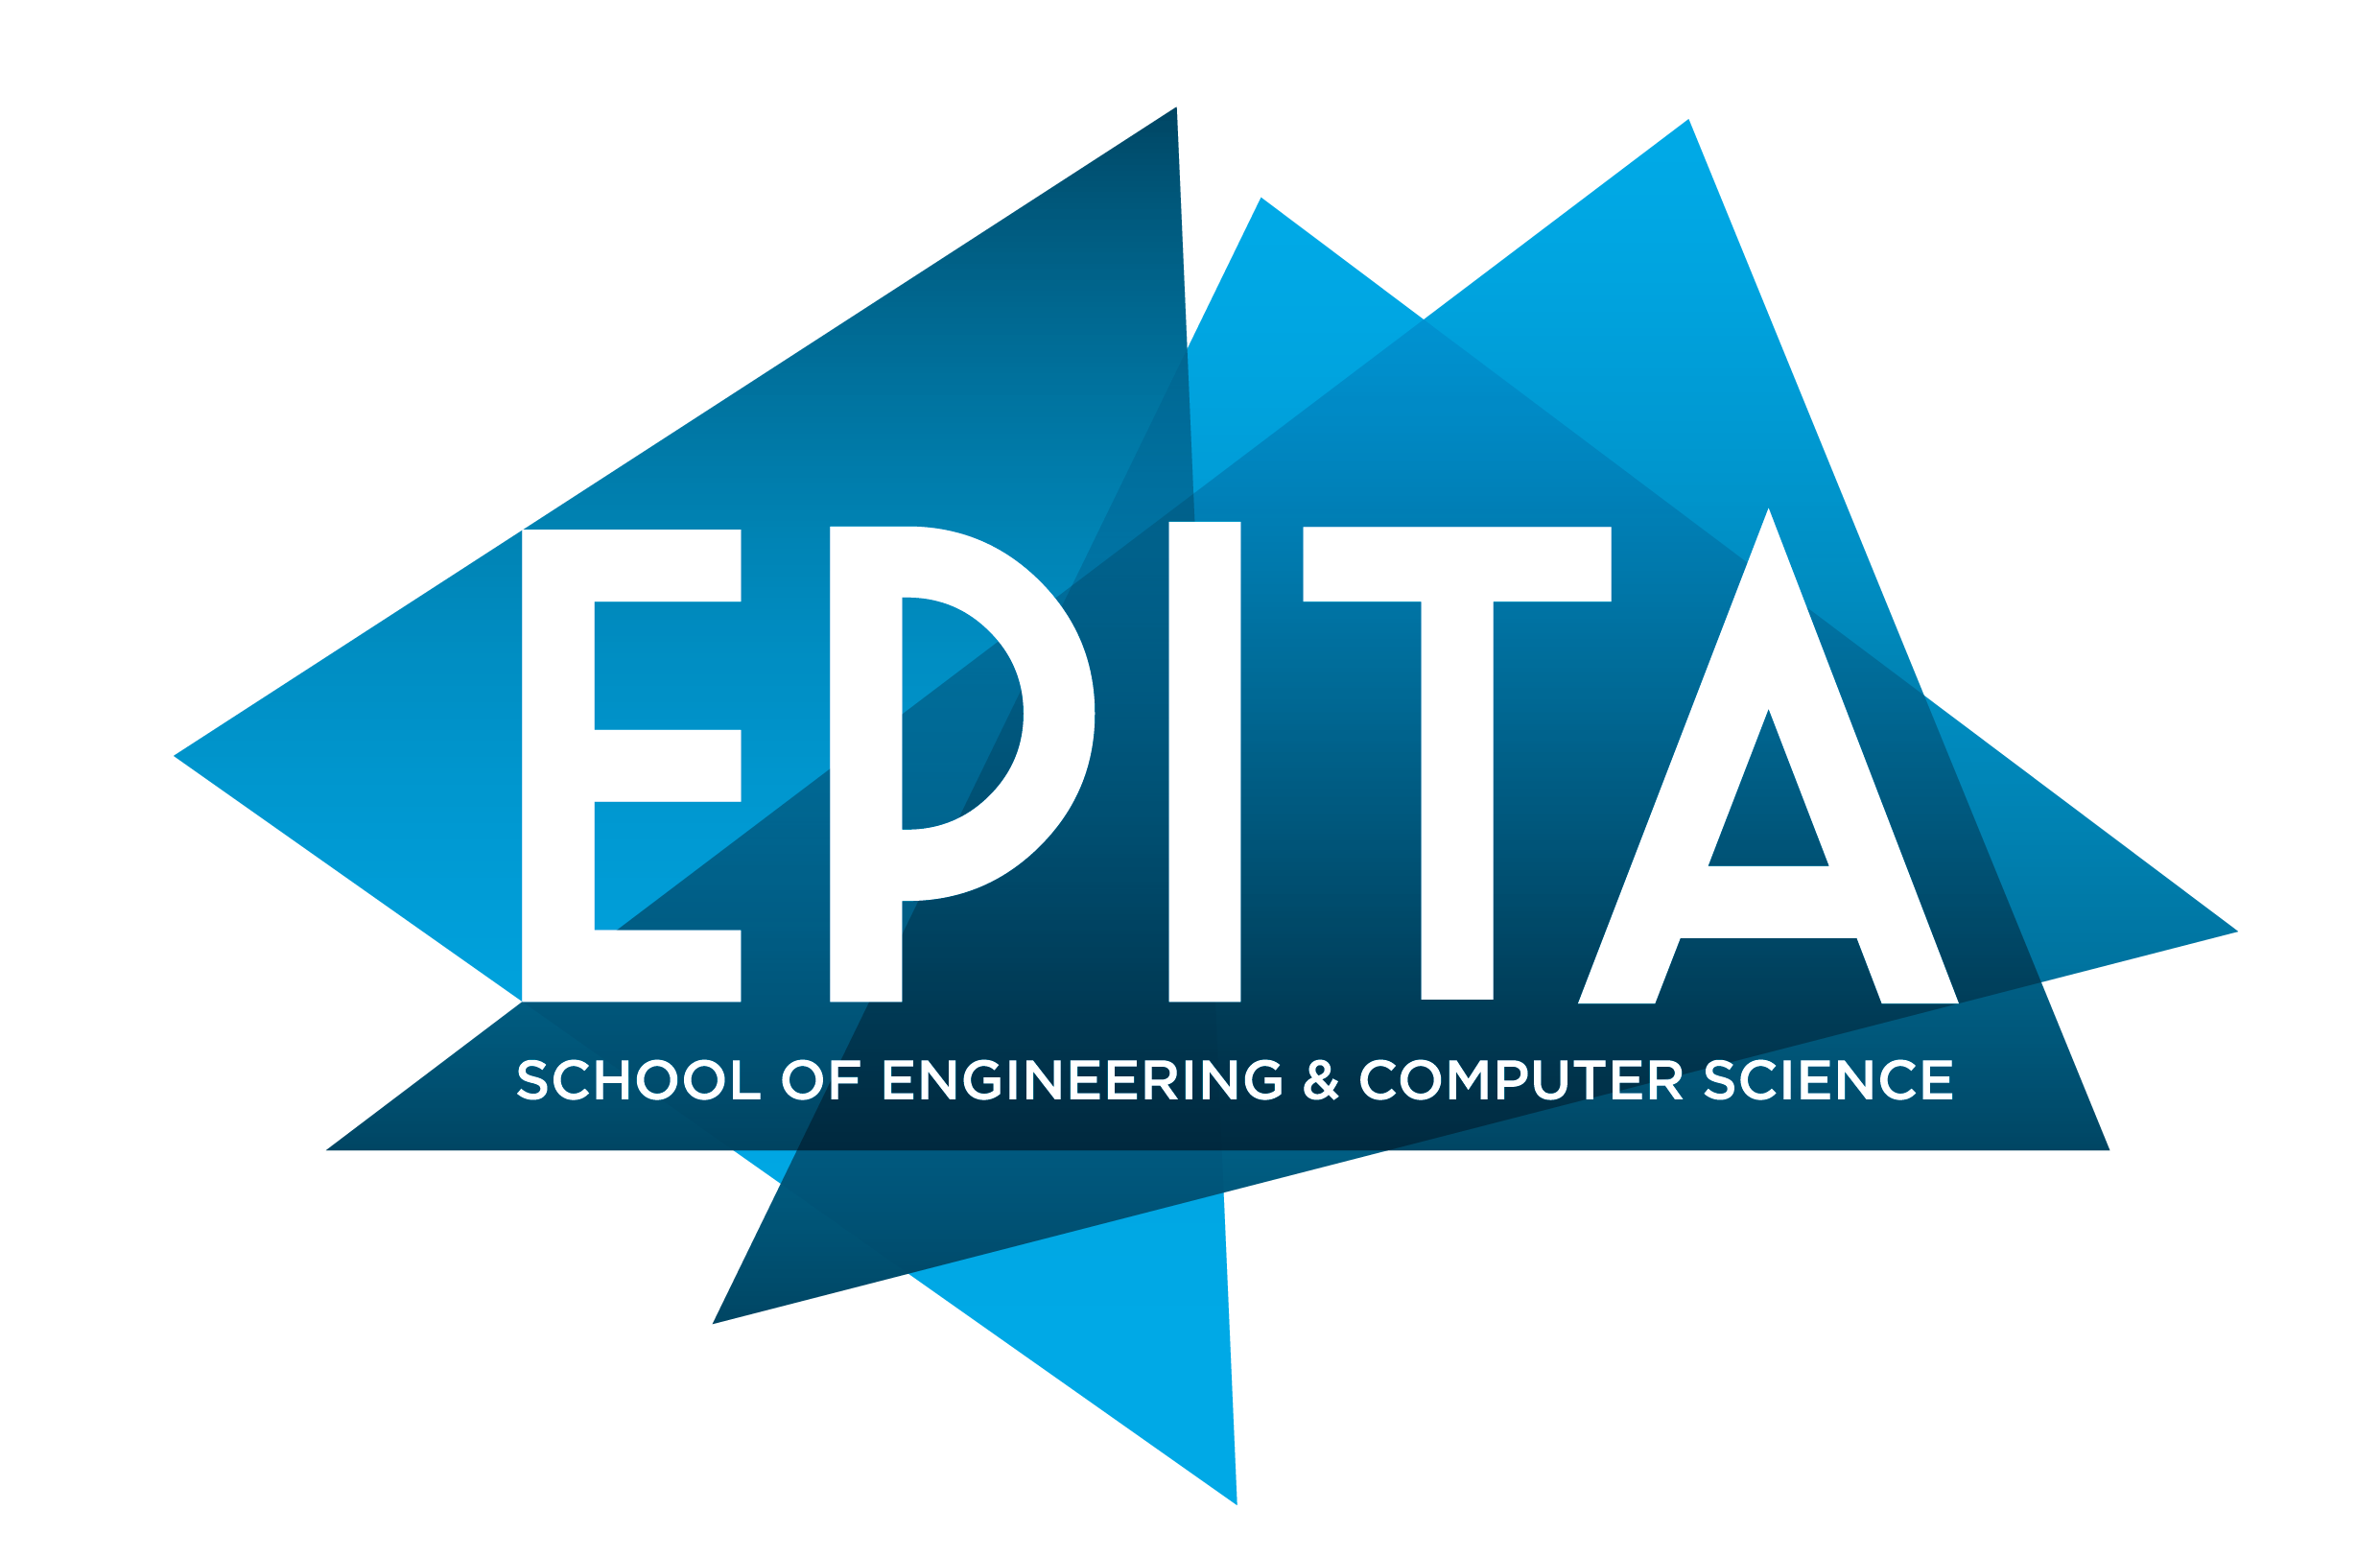 EPITA School of Engineering and Computer Science